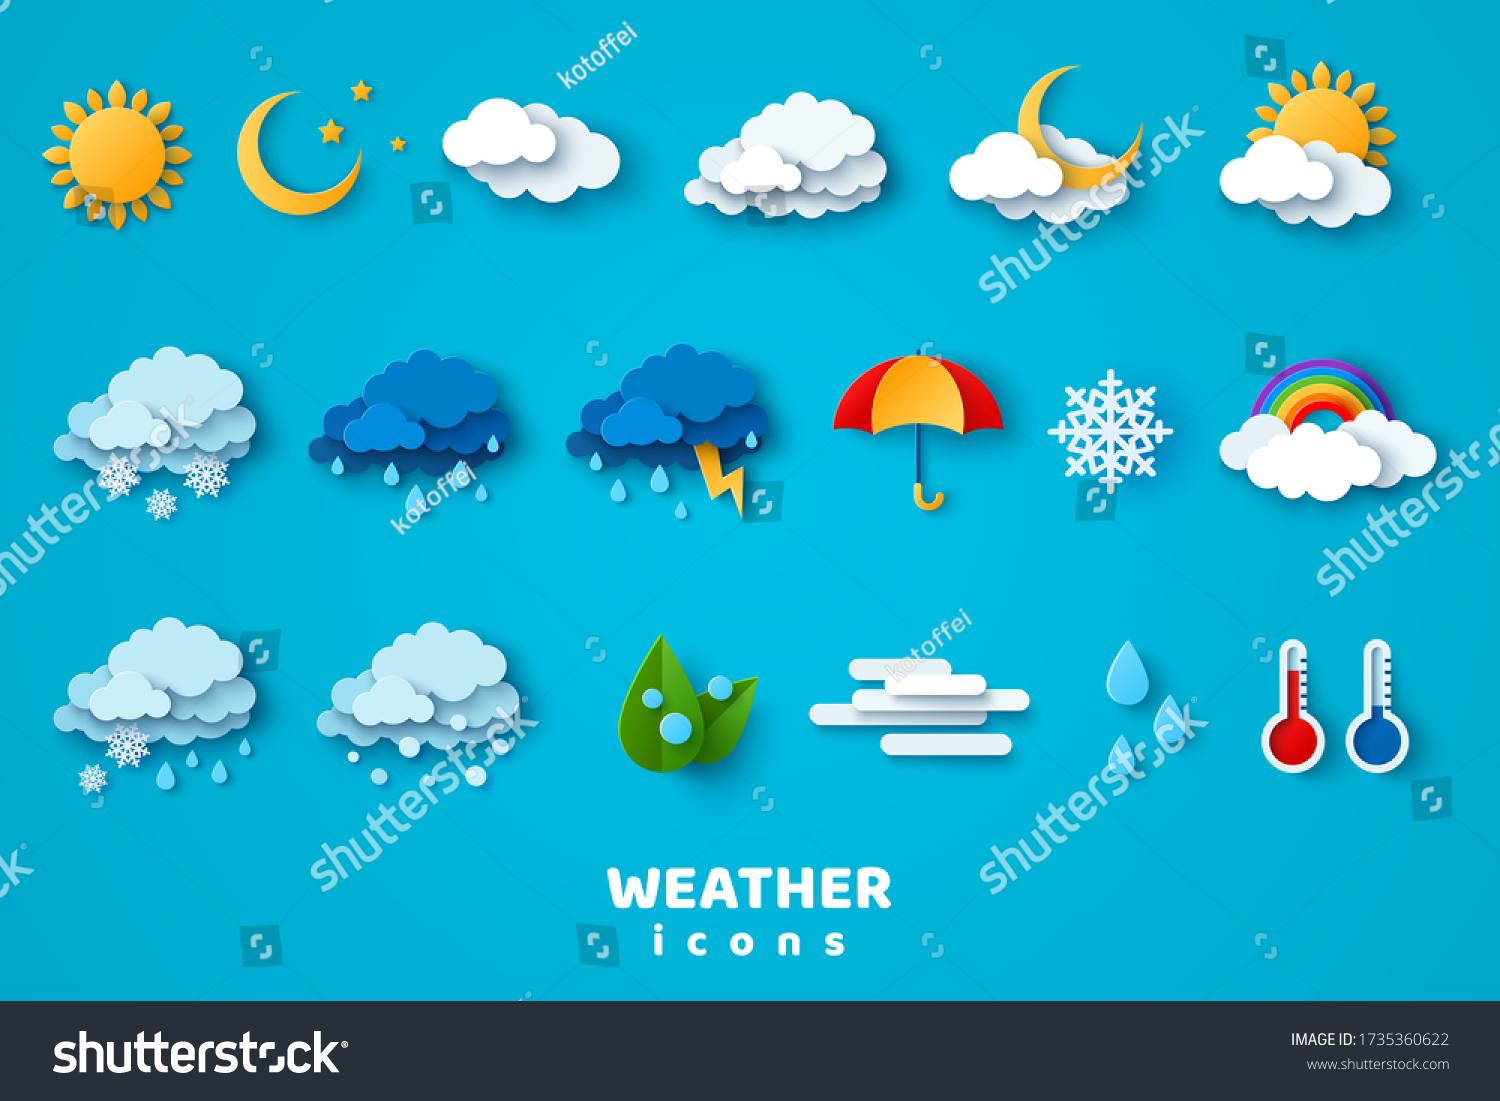 Paper cut weather icons set on blue background. Vector illustration. White clouds, dew on leaves, fog sign, day and night for forecast design. Winter and summer symbols, sun and thunderstorm stickers. #1735360622